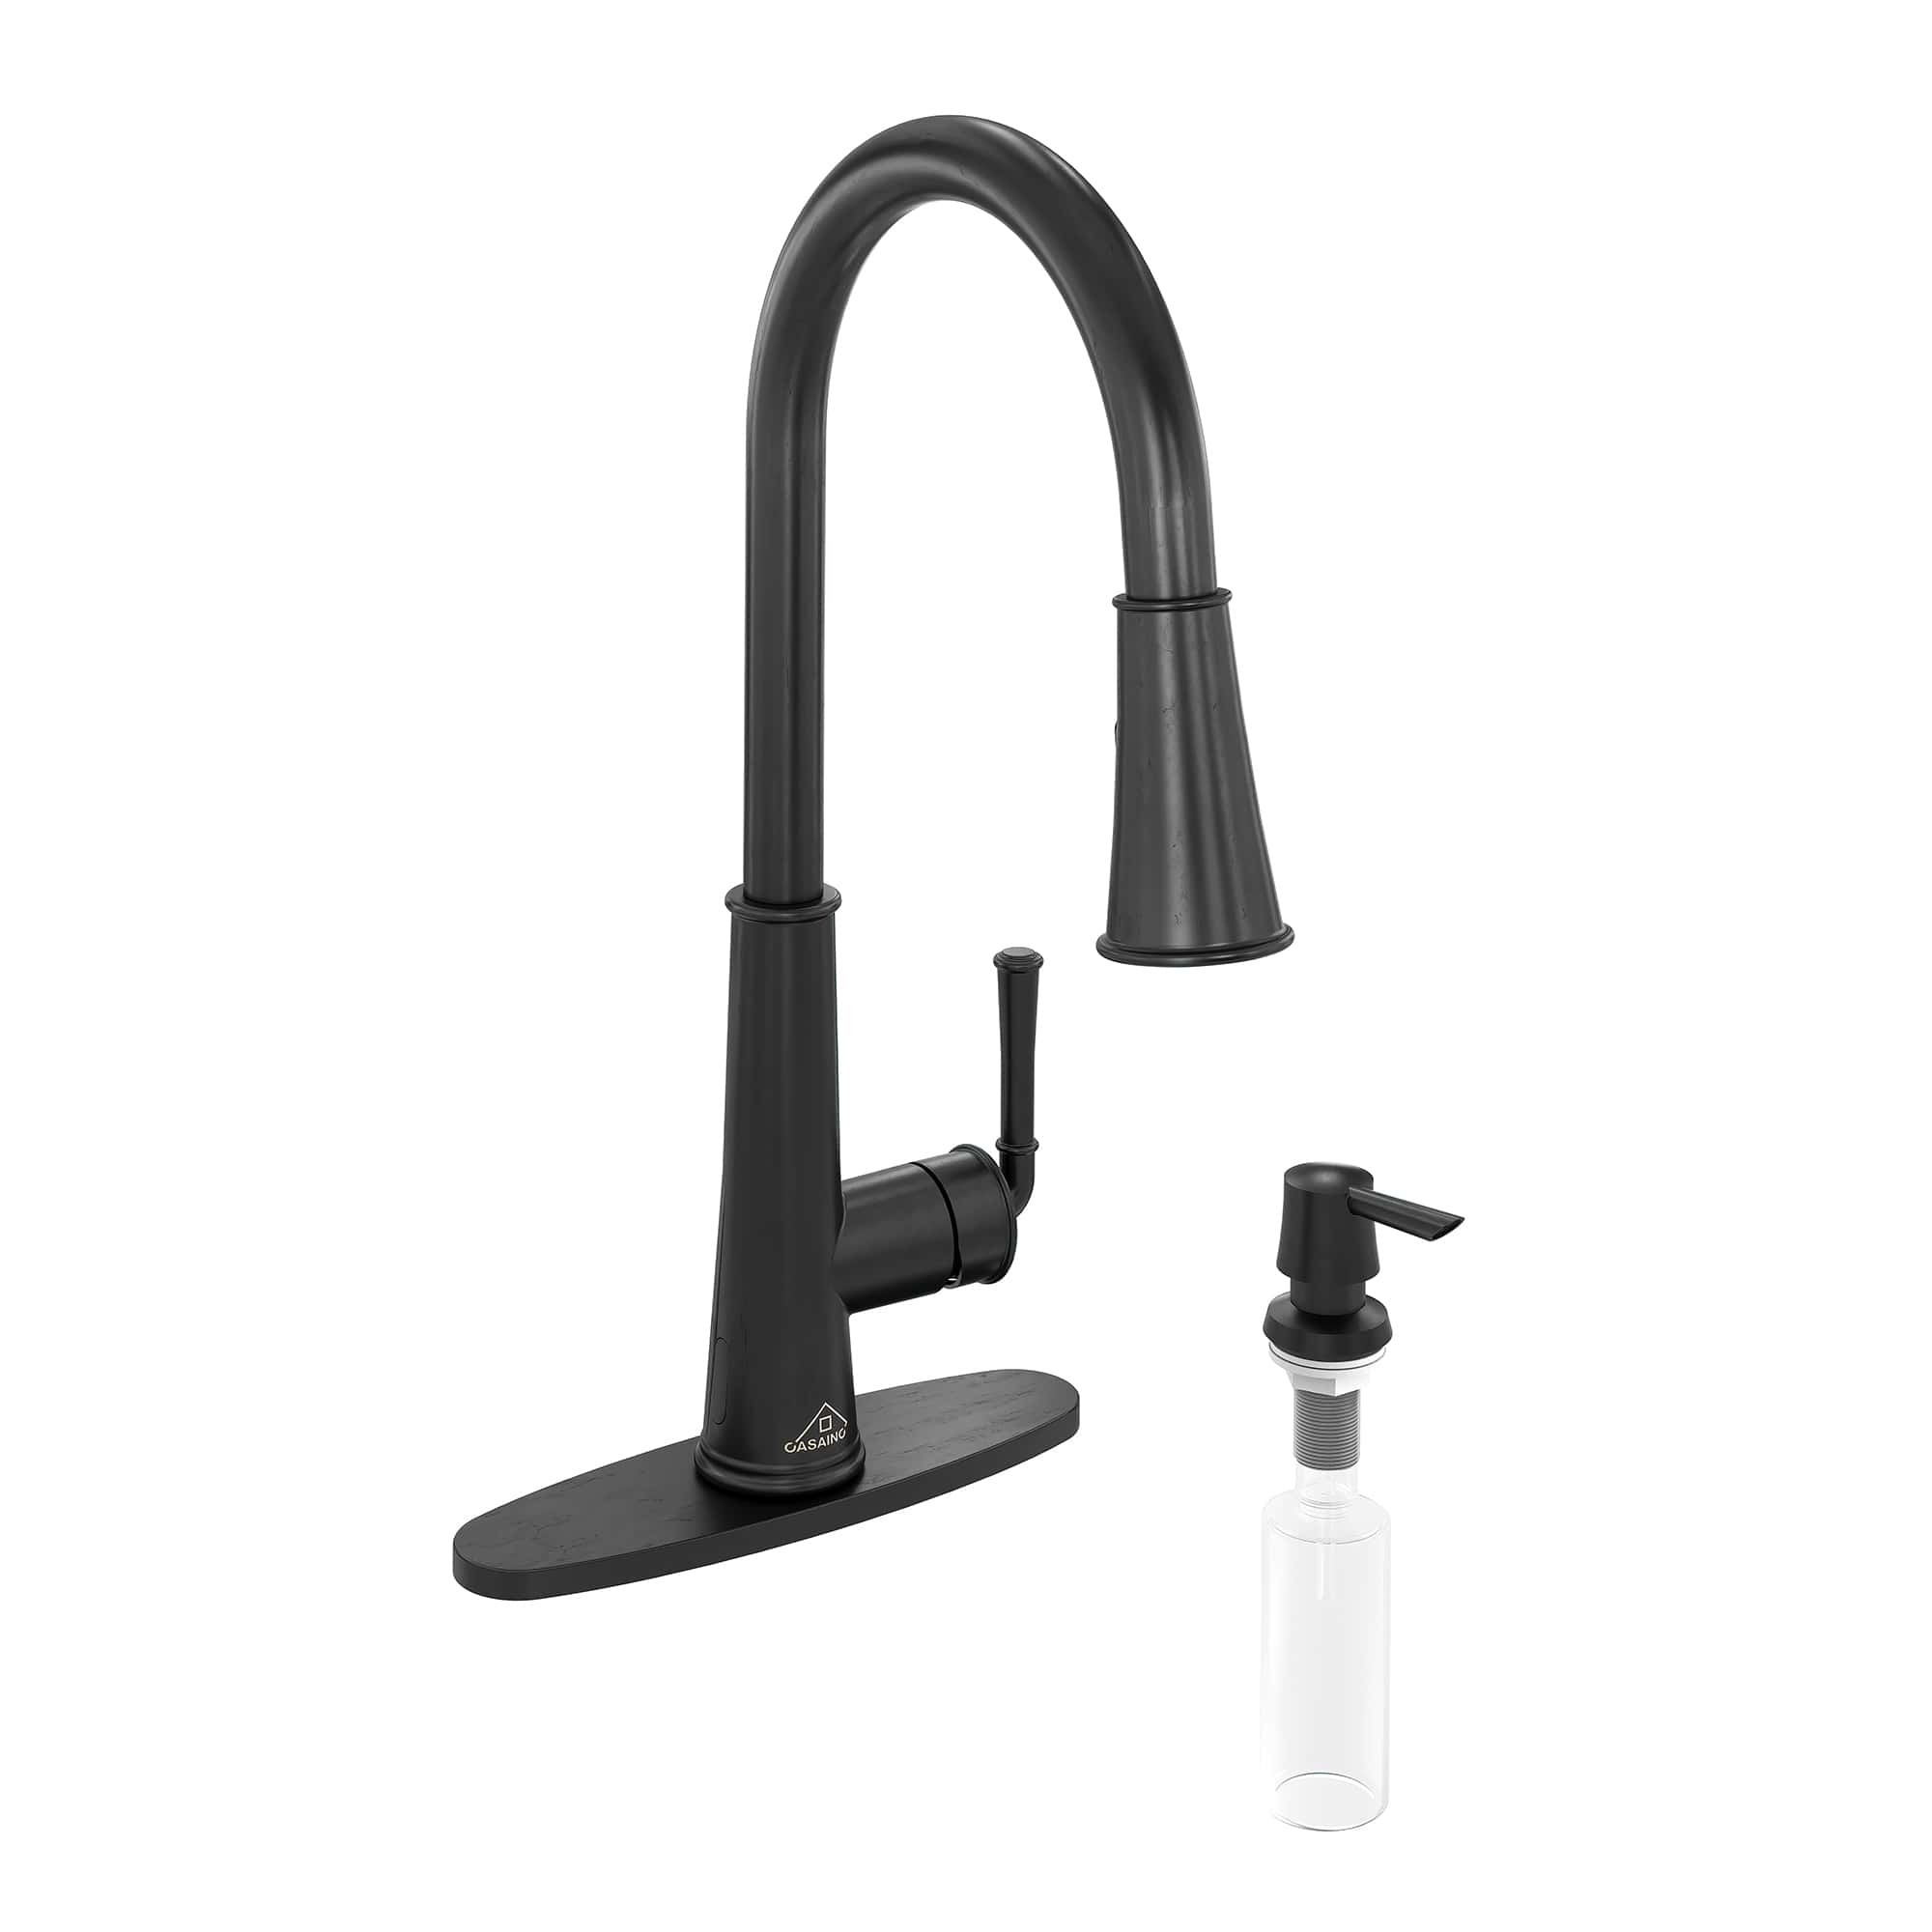 CASAINC 1.8GPM Infrared Induction Kitchen Faucet With LED Function in Matte Black and More